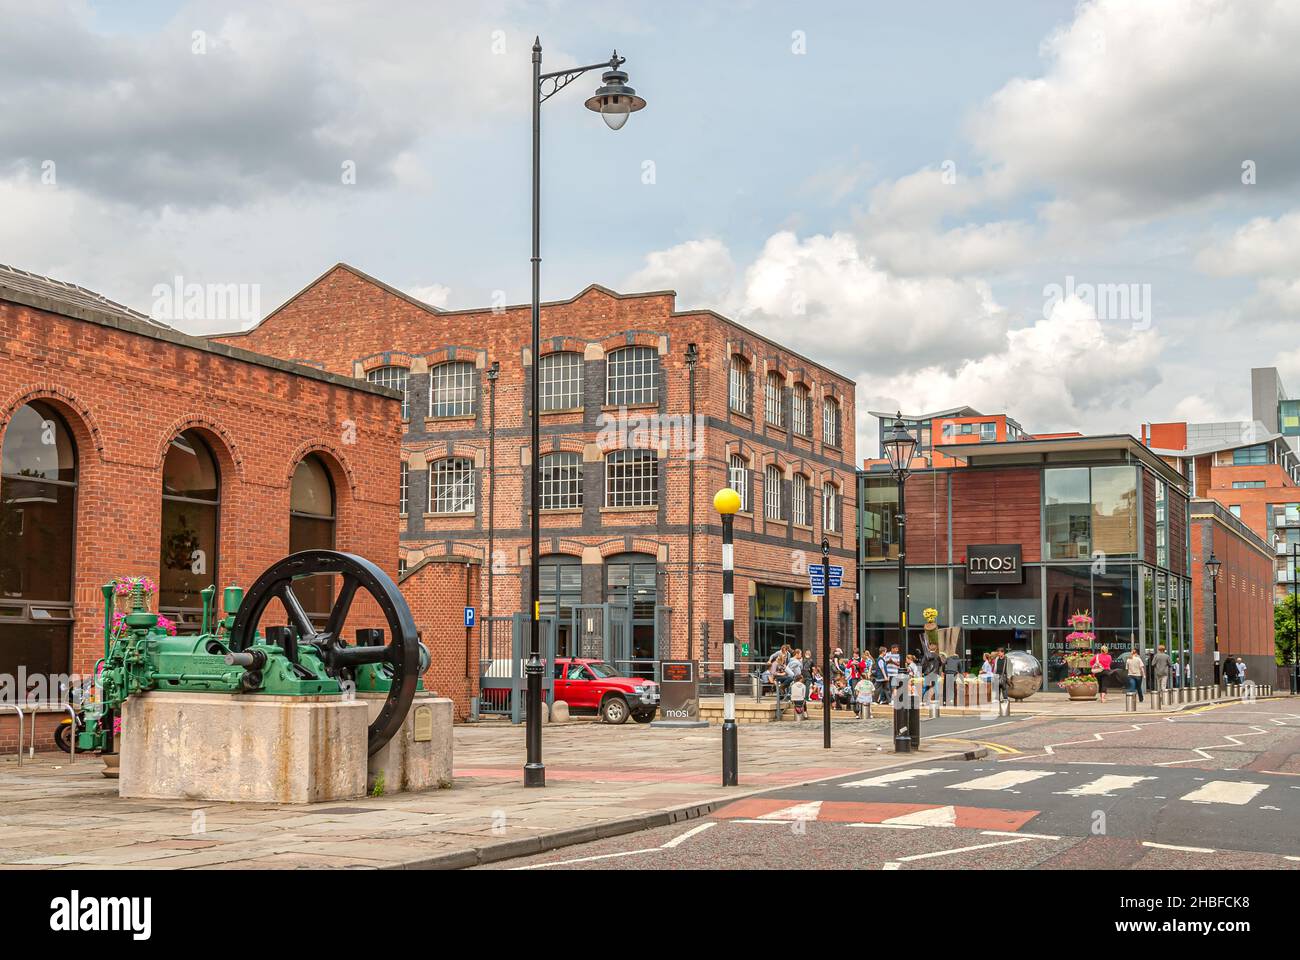 The Museum of Science and Industry in Manchester (MOSI), located in Manchester, England Stock Photo